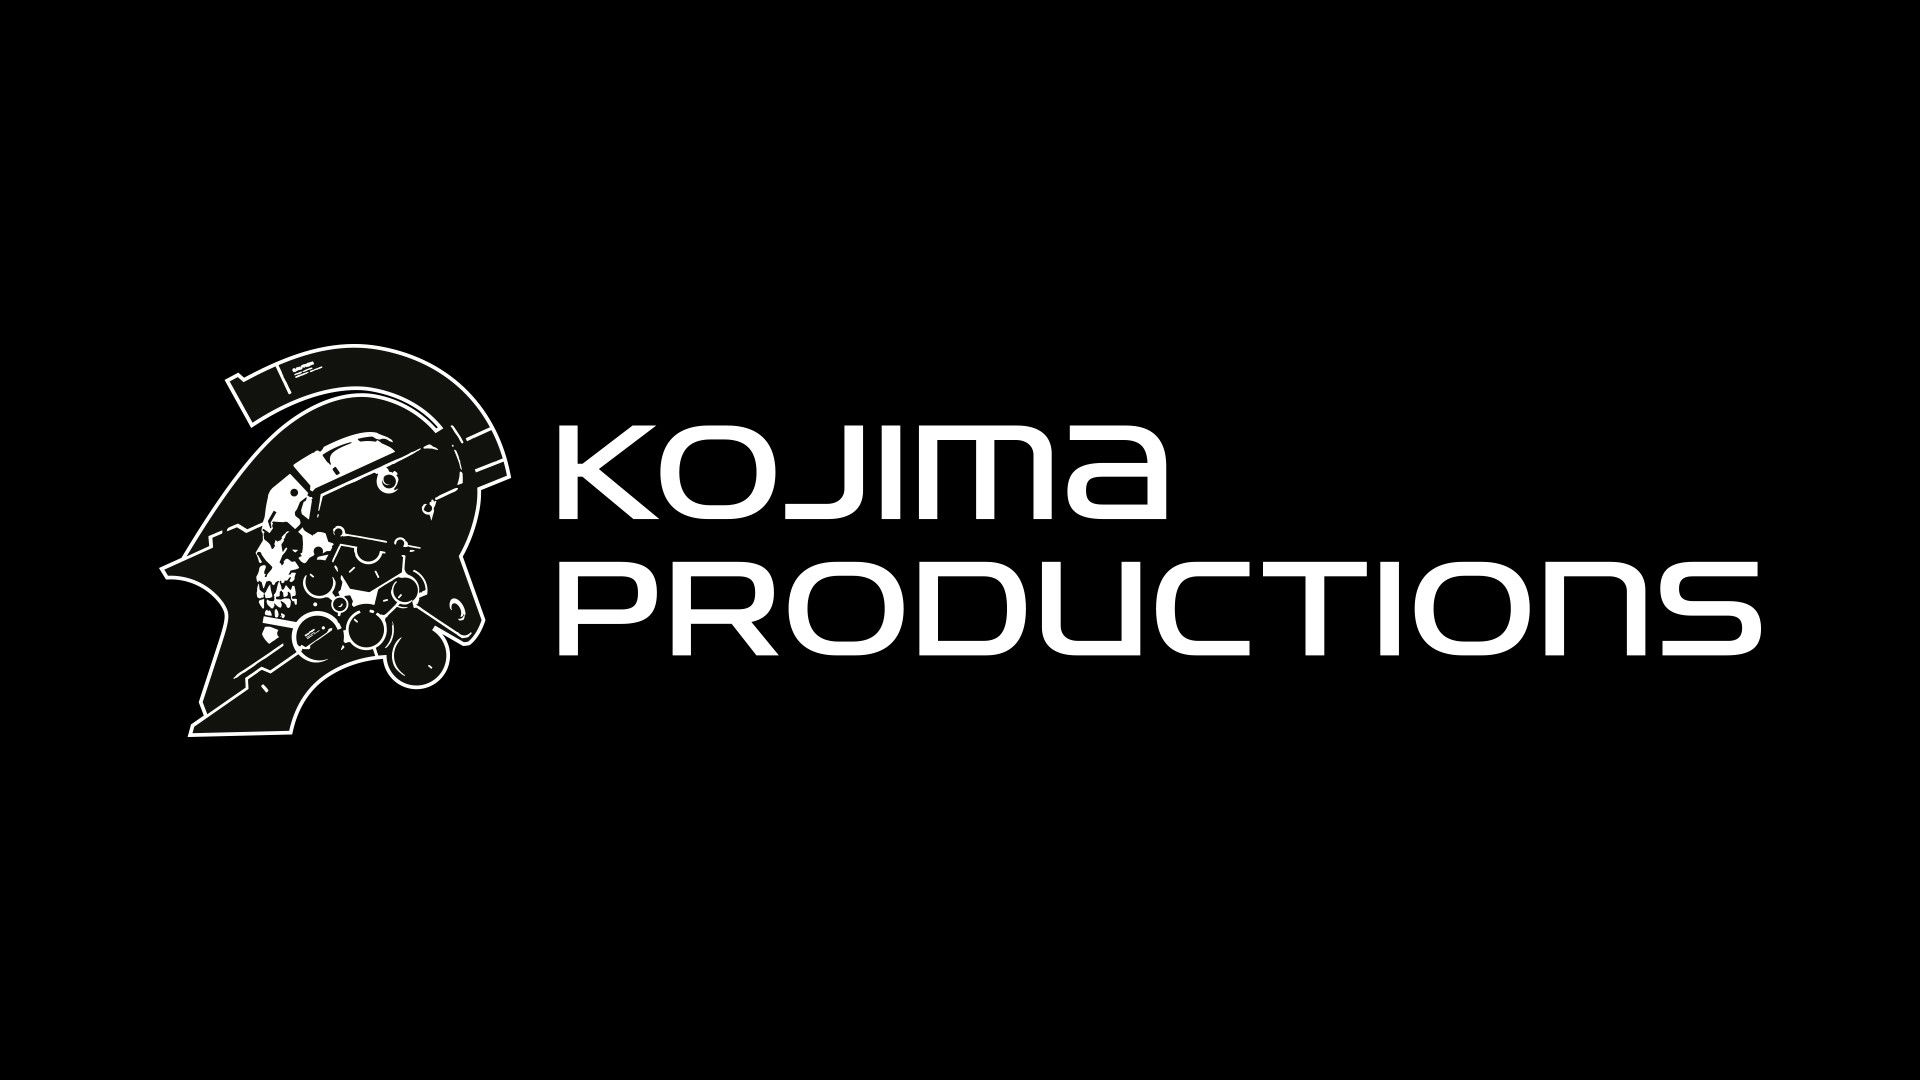 Kojima Productions Art Director Says New Game Announcement Should Come Quite Soon